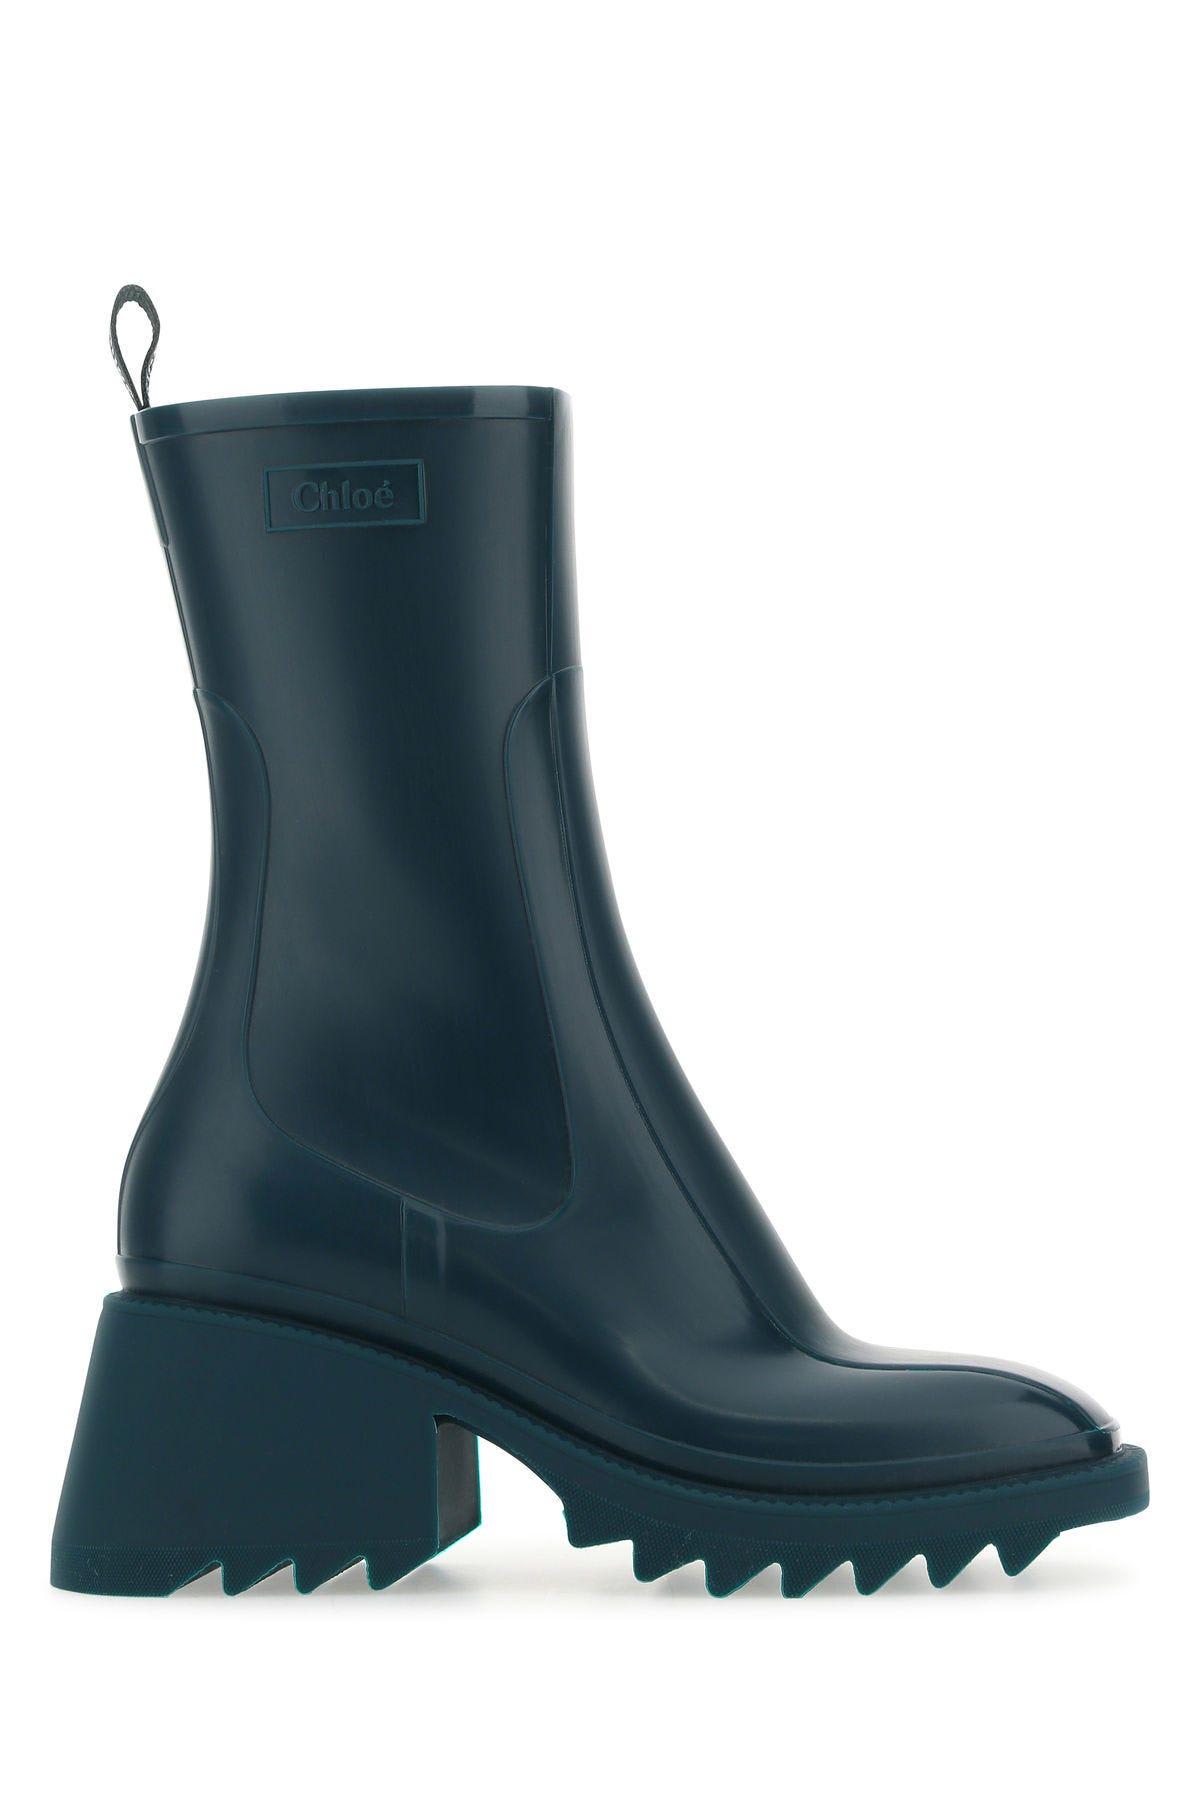 CHLOÉ BOTTLE GREEN RUBBER ANKLE BOOTS